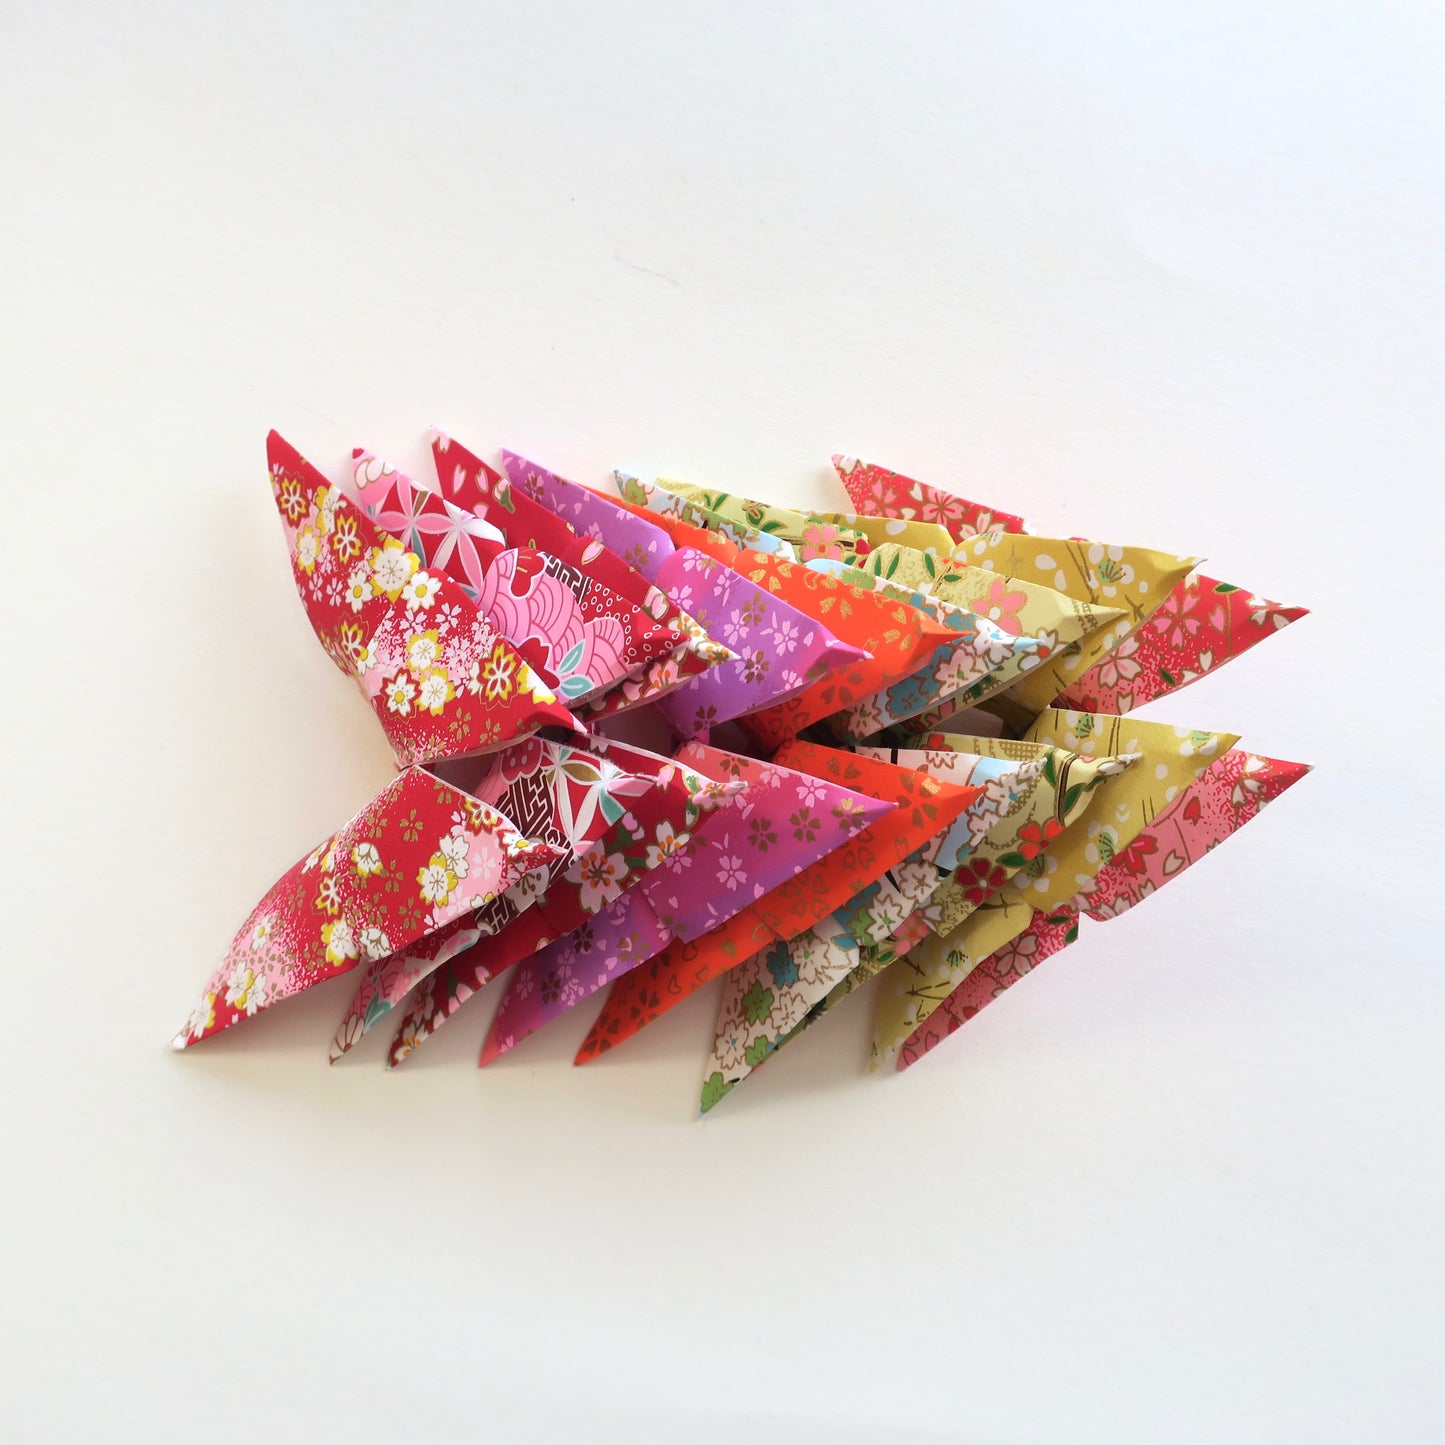 Pack of 5 or 15 Yuzen Washi Origami Paper Butterflies - Large - Origami Decorations - Lavender Home London